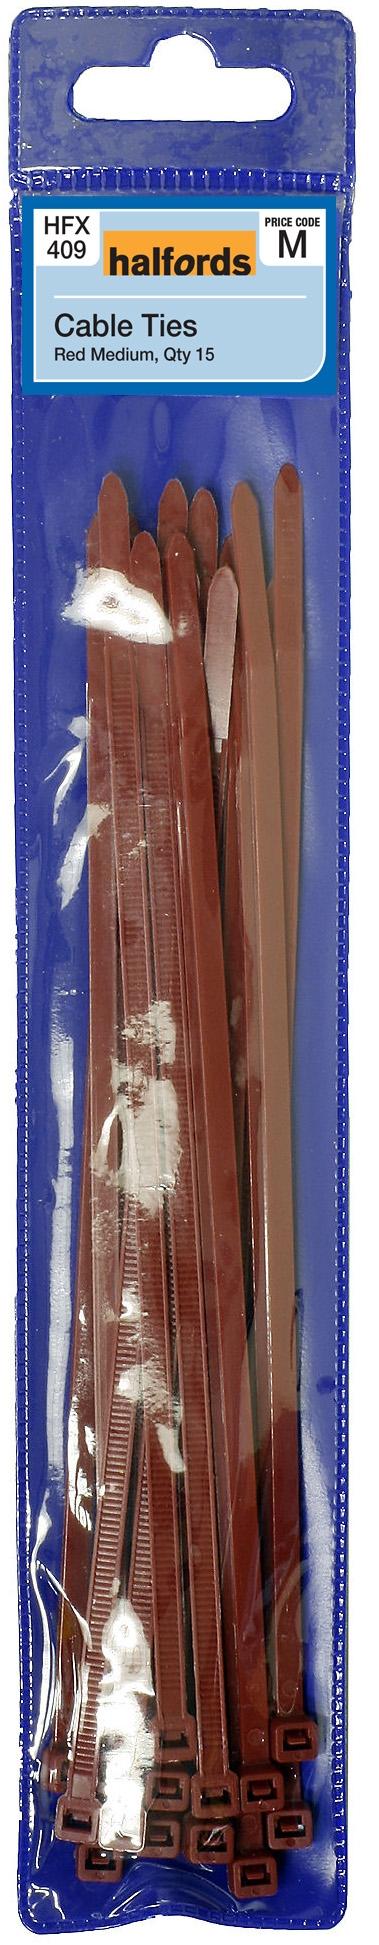 Halfords Cable Ties (Hfx409) Red